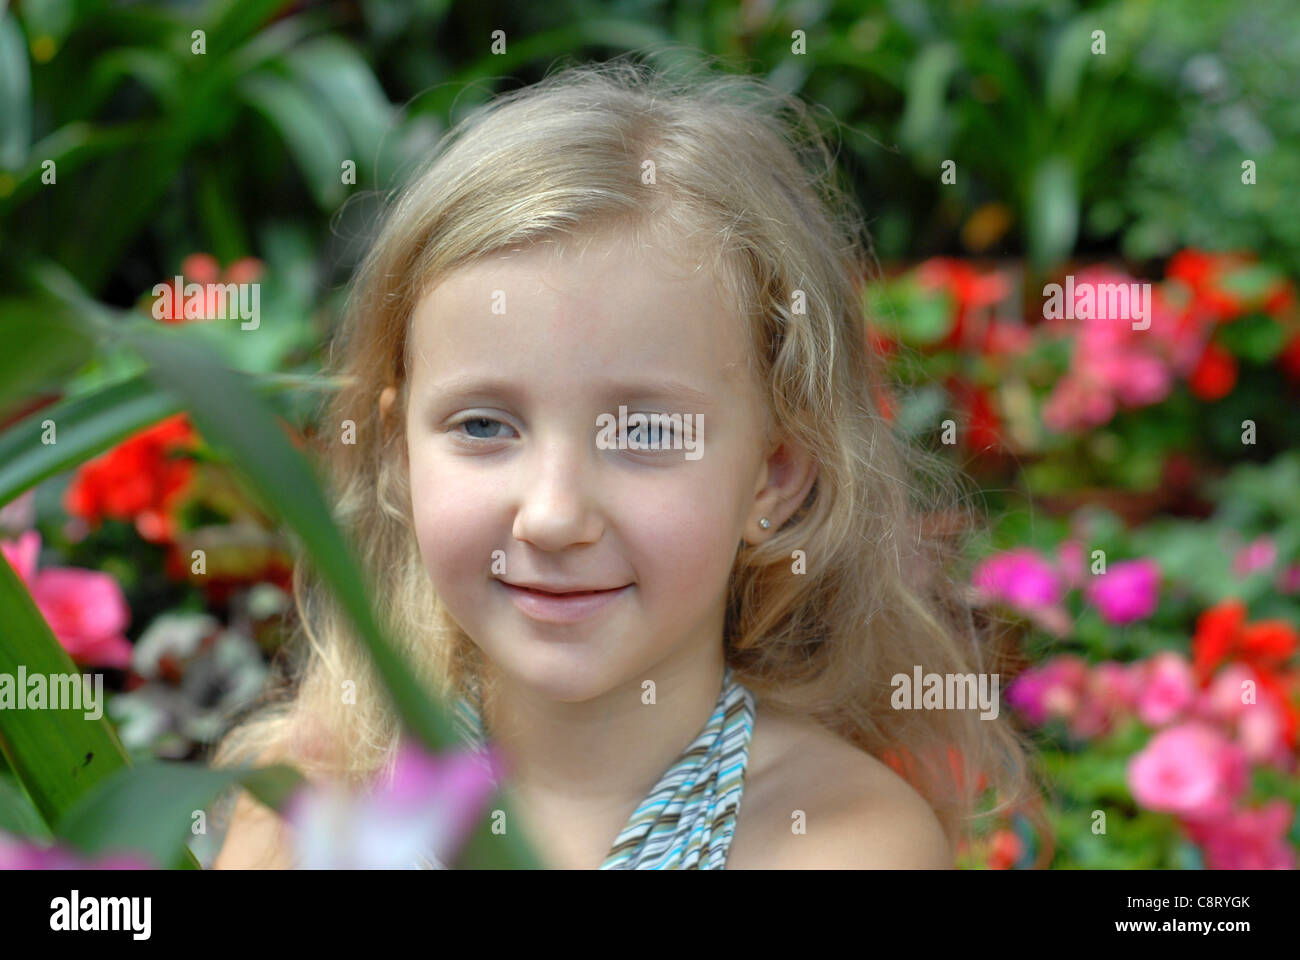 child girl portrait in the flowers Stock Photo